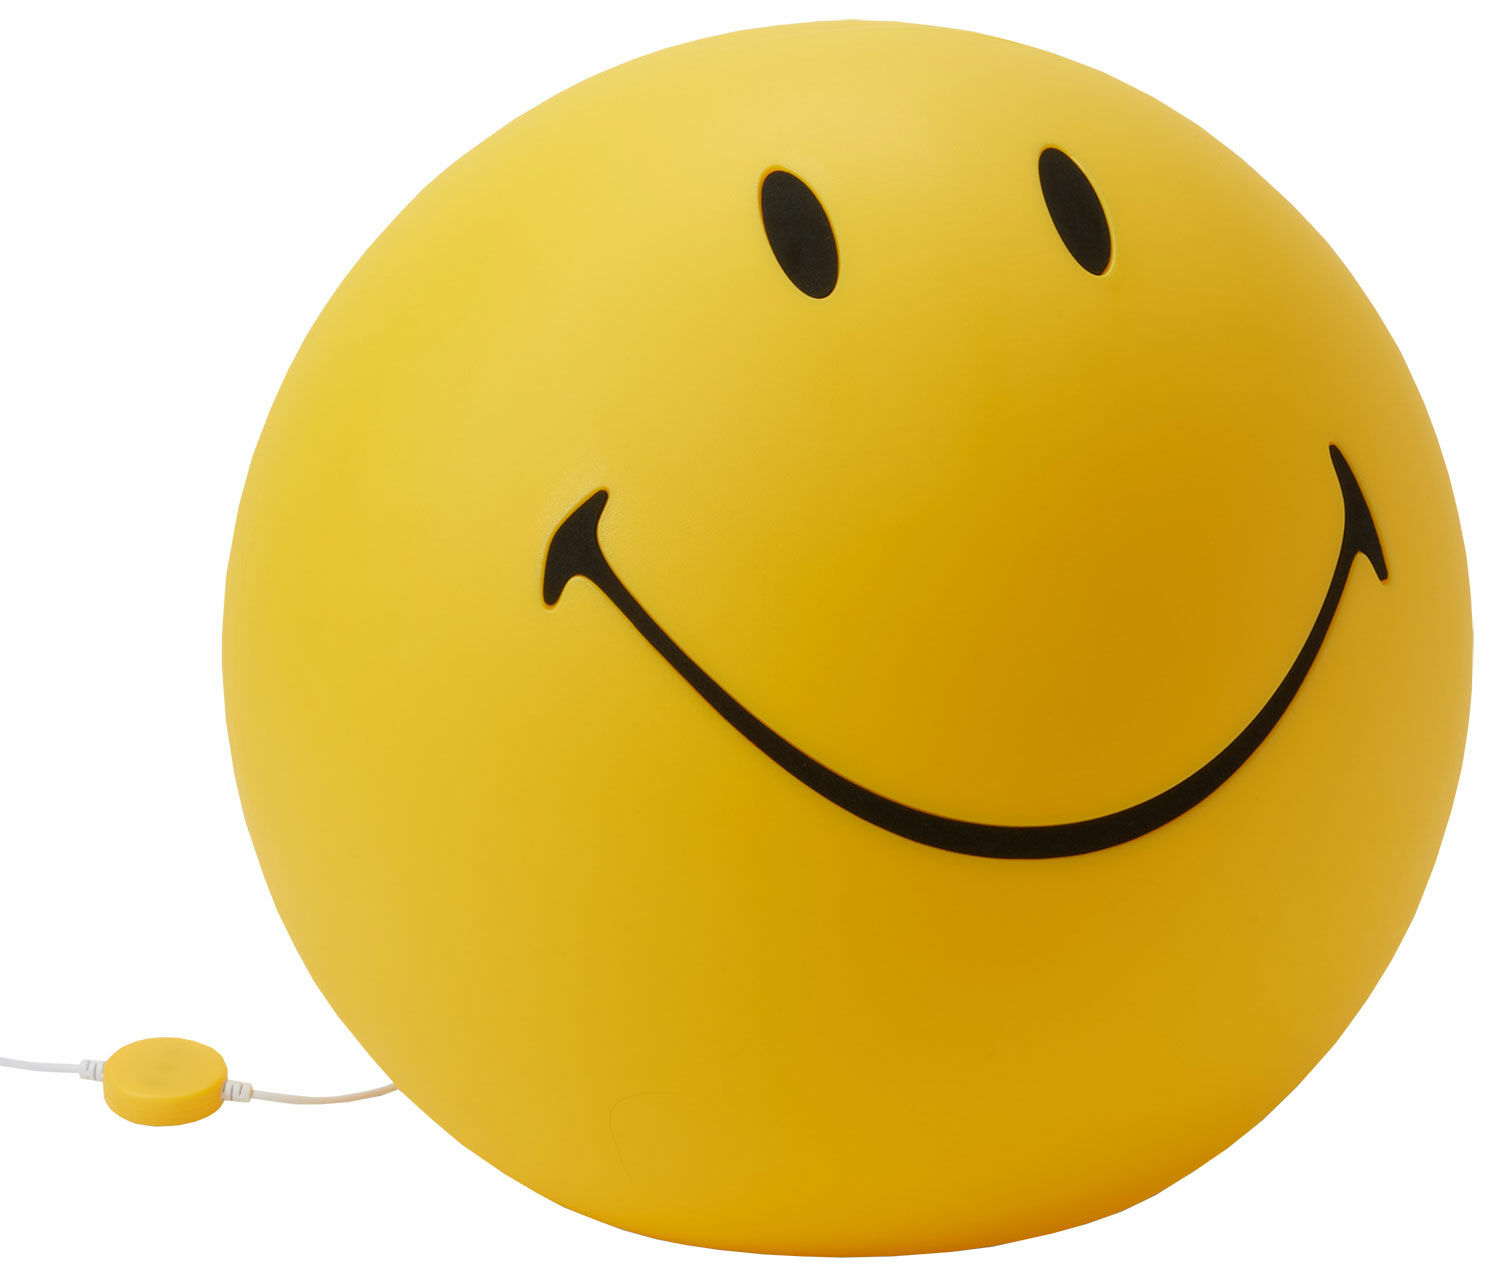 LED lamp "Smiley®", large version, dimmable incl. night mode by Mr. Maria